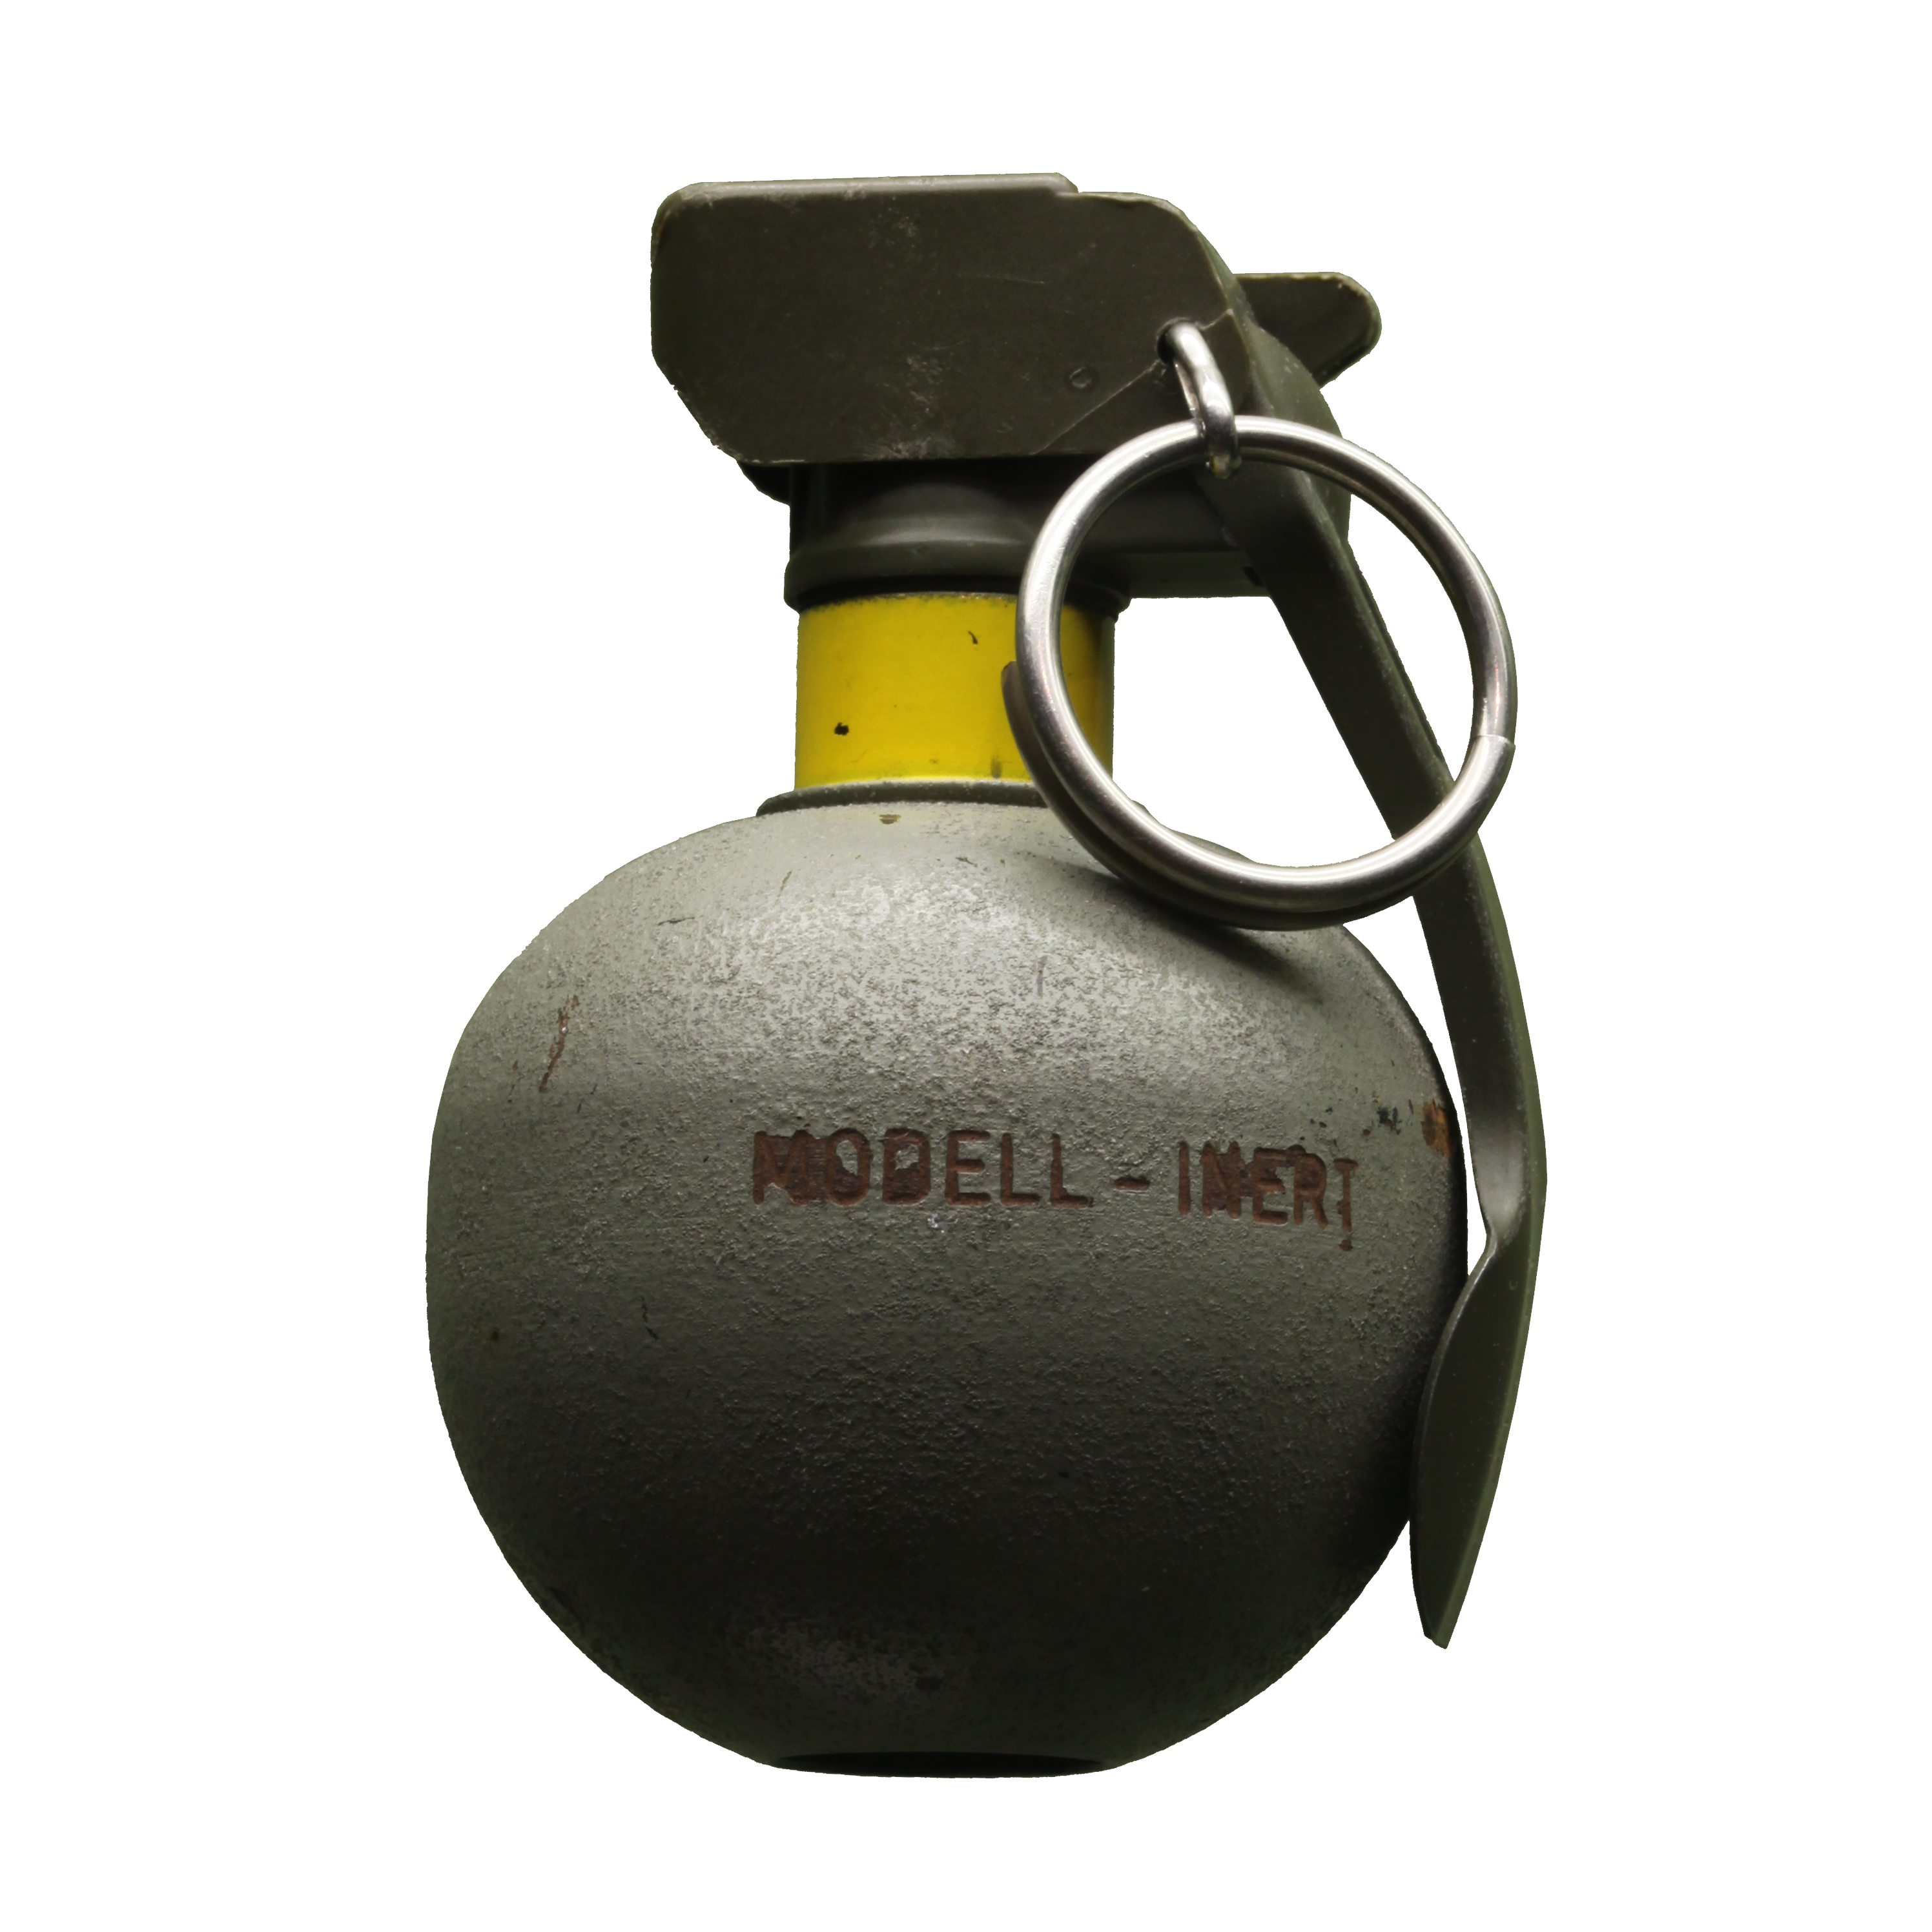 Amazing Grenade Pictures & Backgrounds